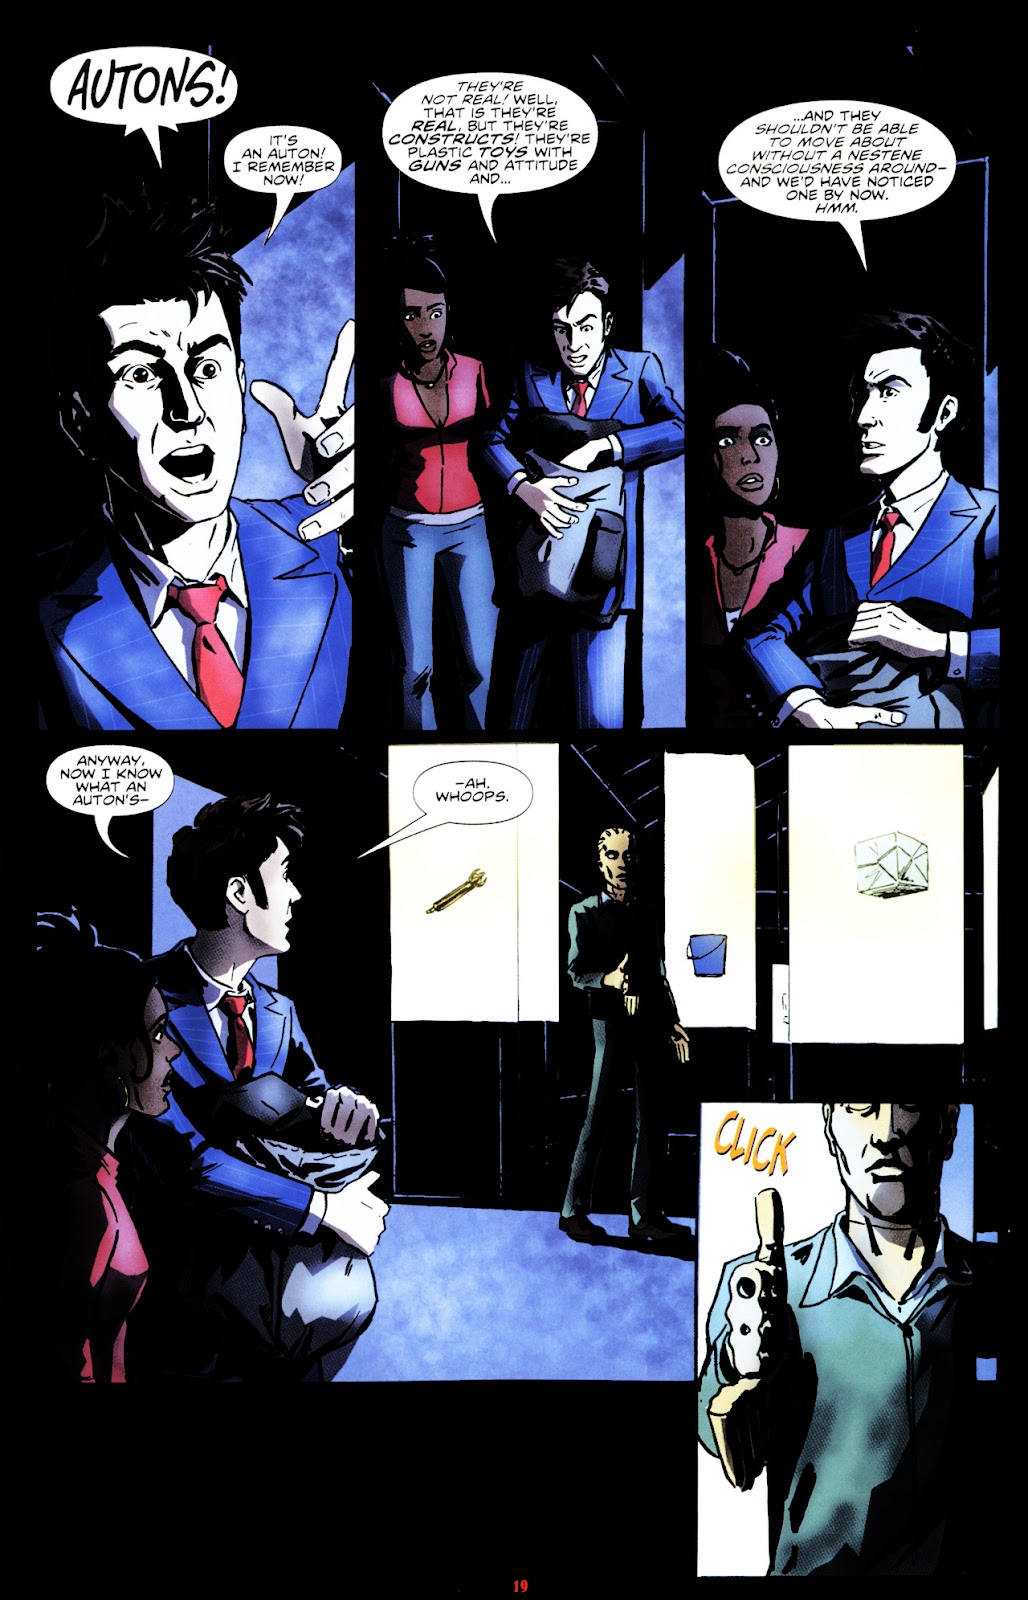 Doctor Who: The Forgotten issue 2 - Page 21